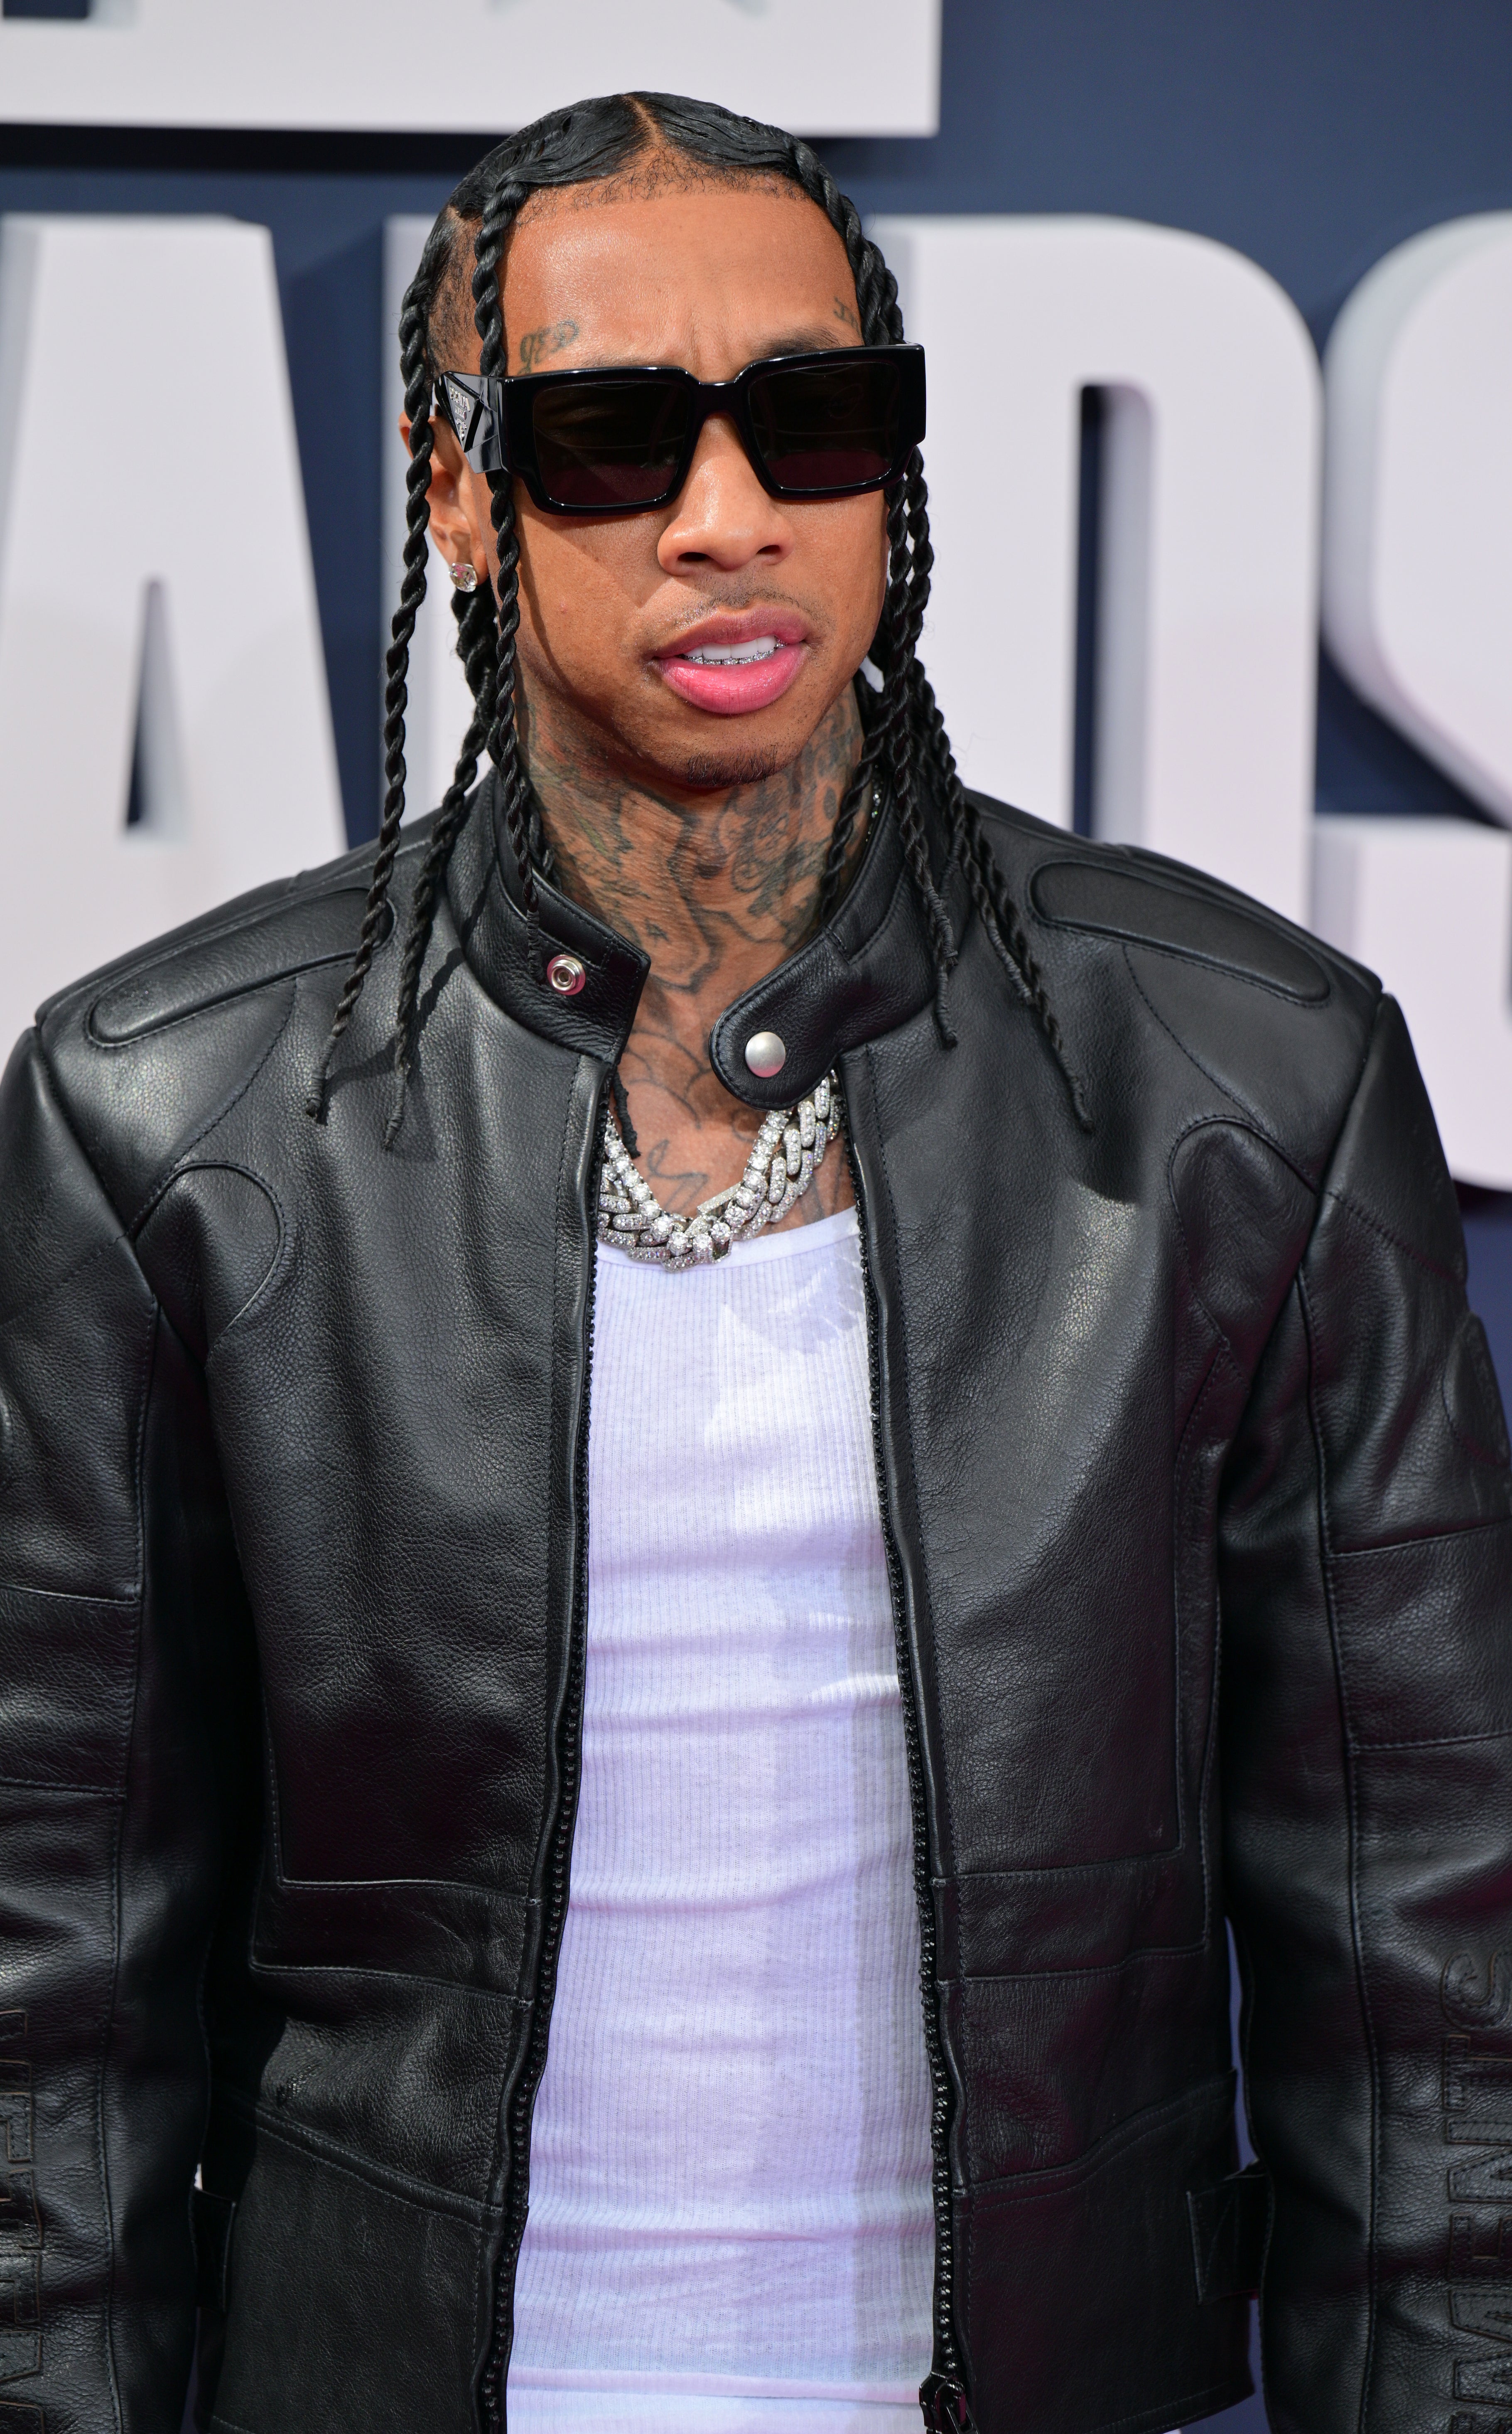 Tyga on the red carpet wearing a shirt, chain, leather jacket, and sunglasses